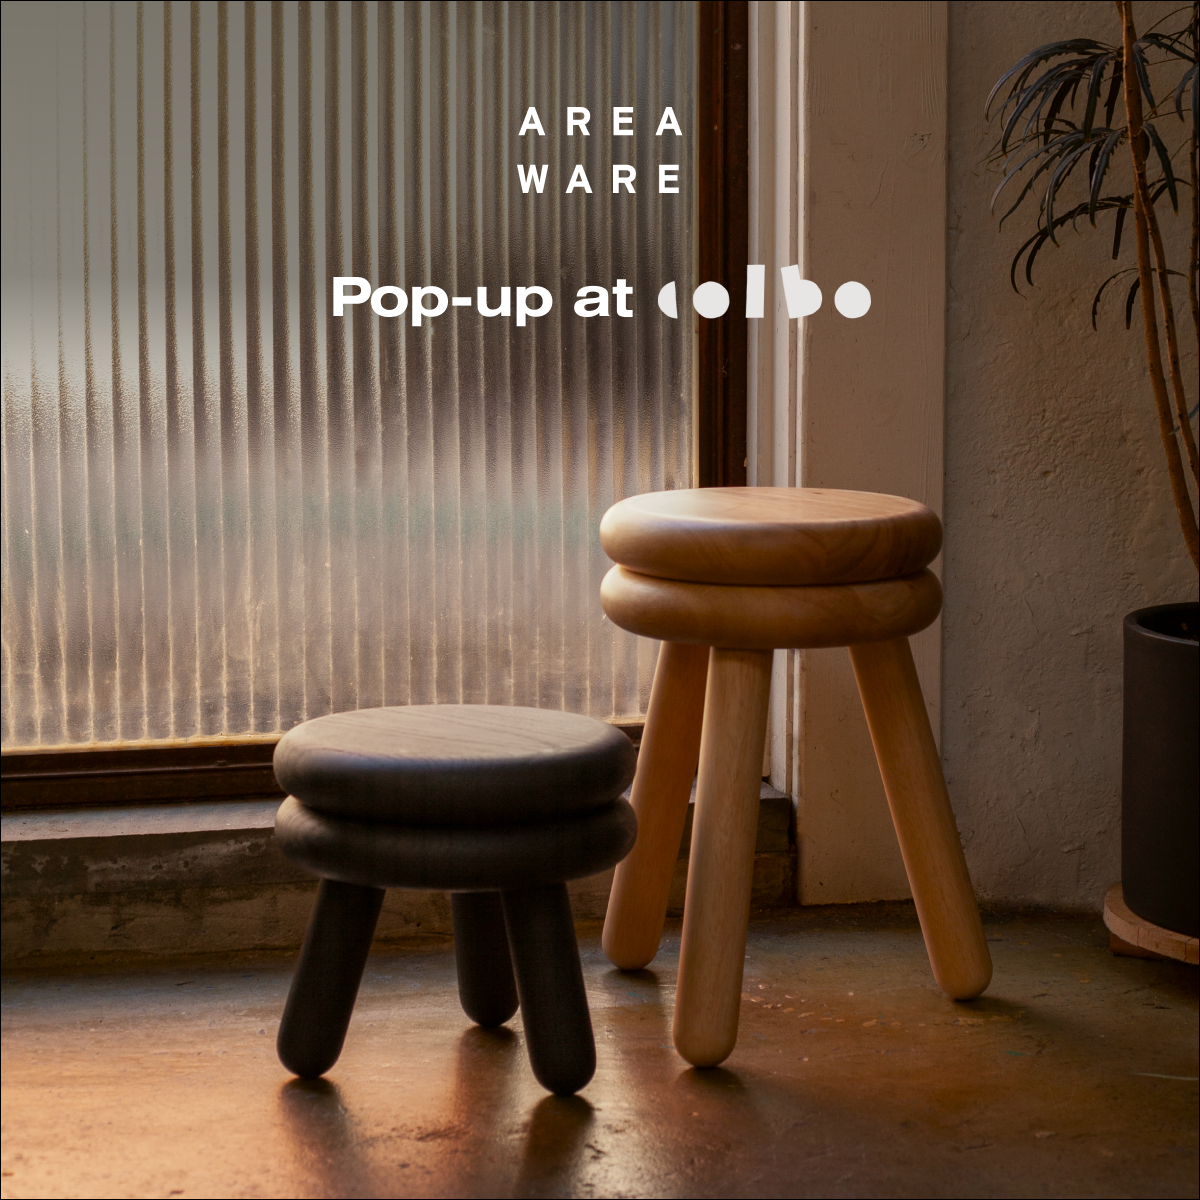 NYCxDesign Week: Areaware Pop-Up at Colbo